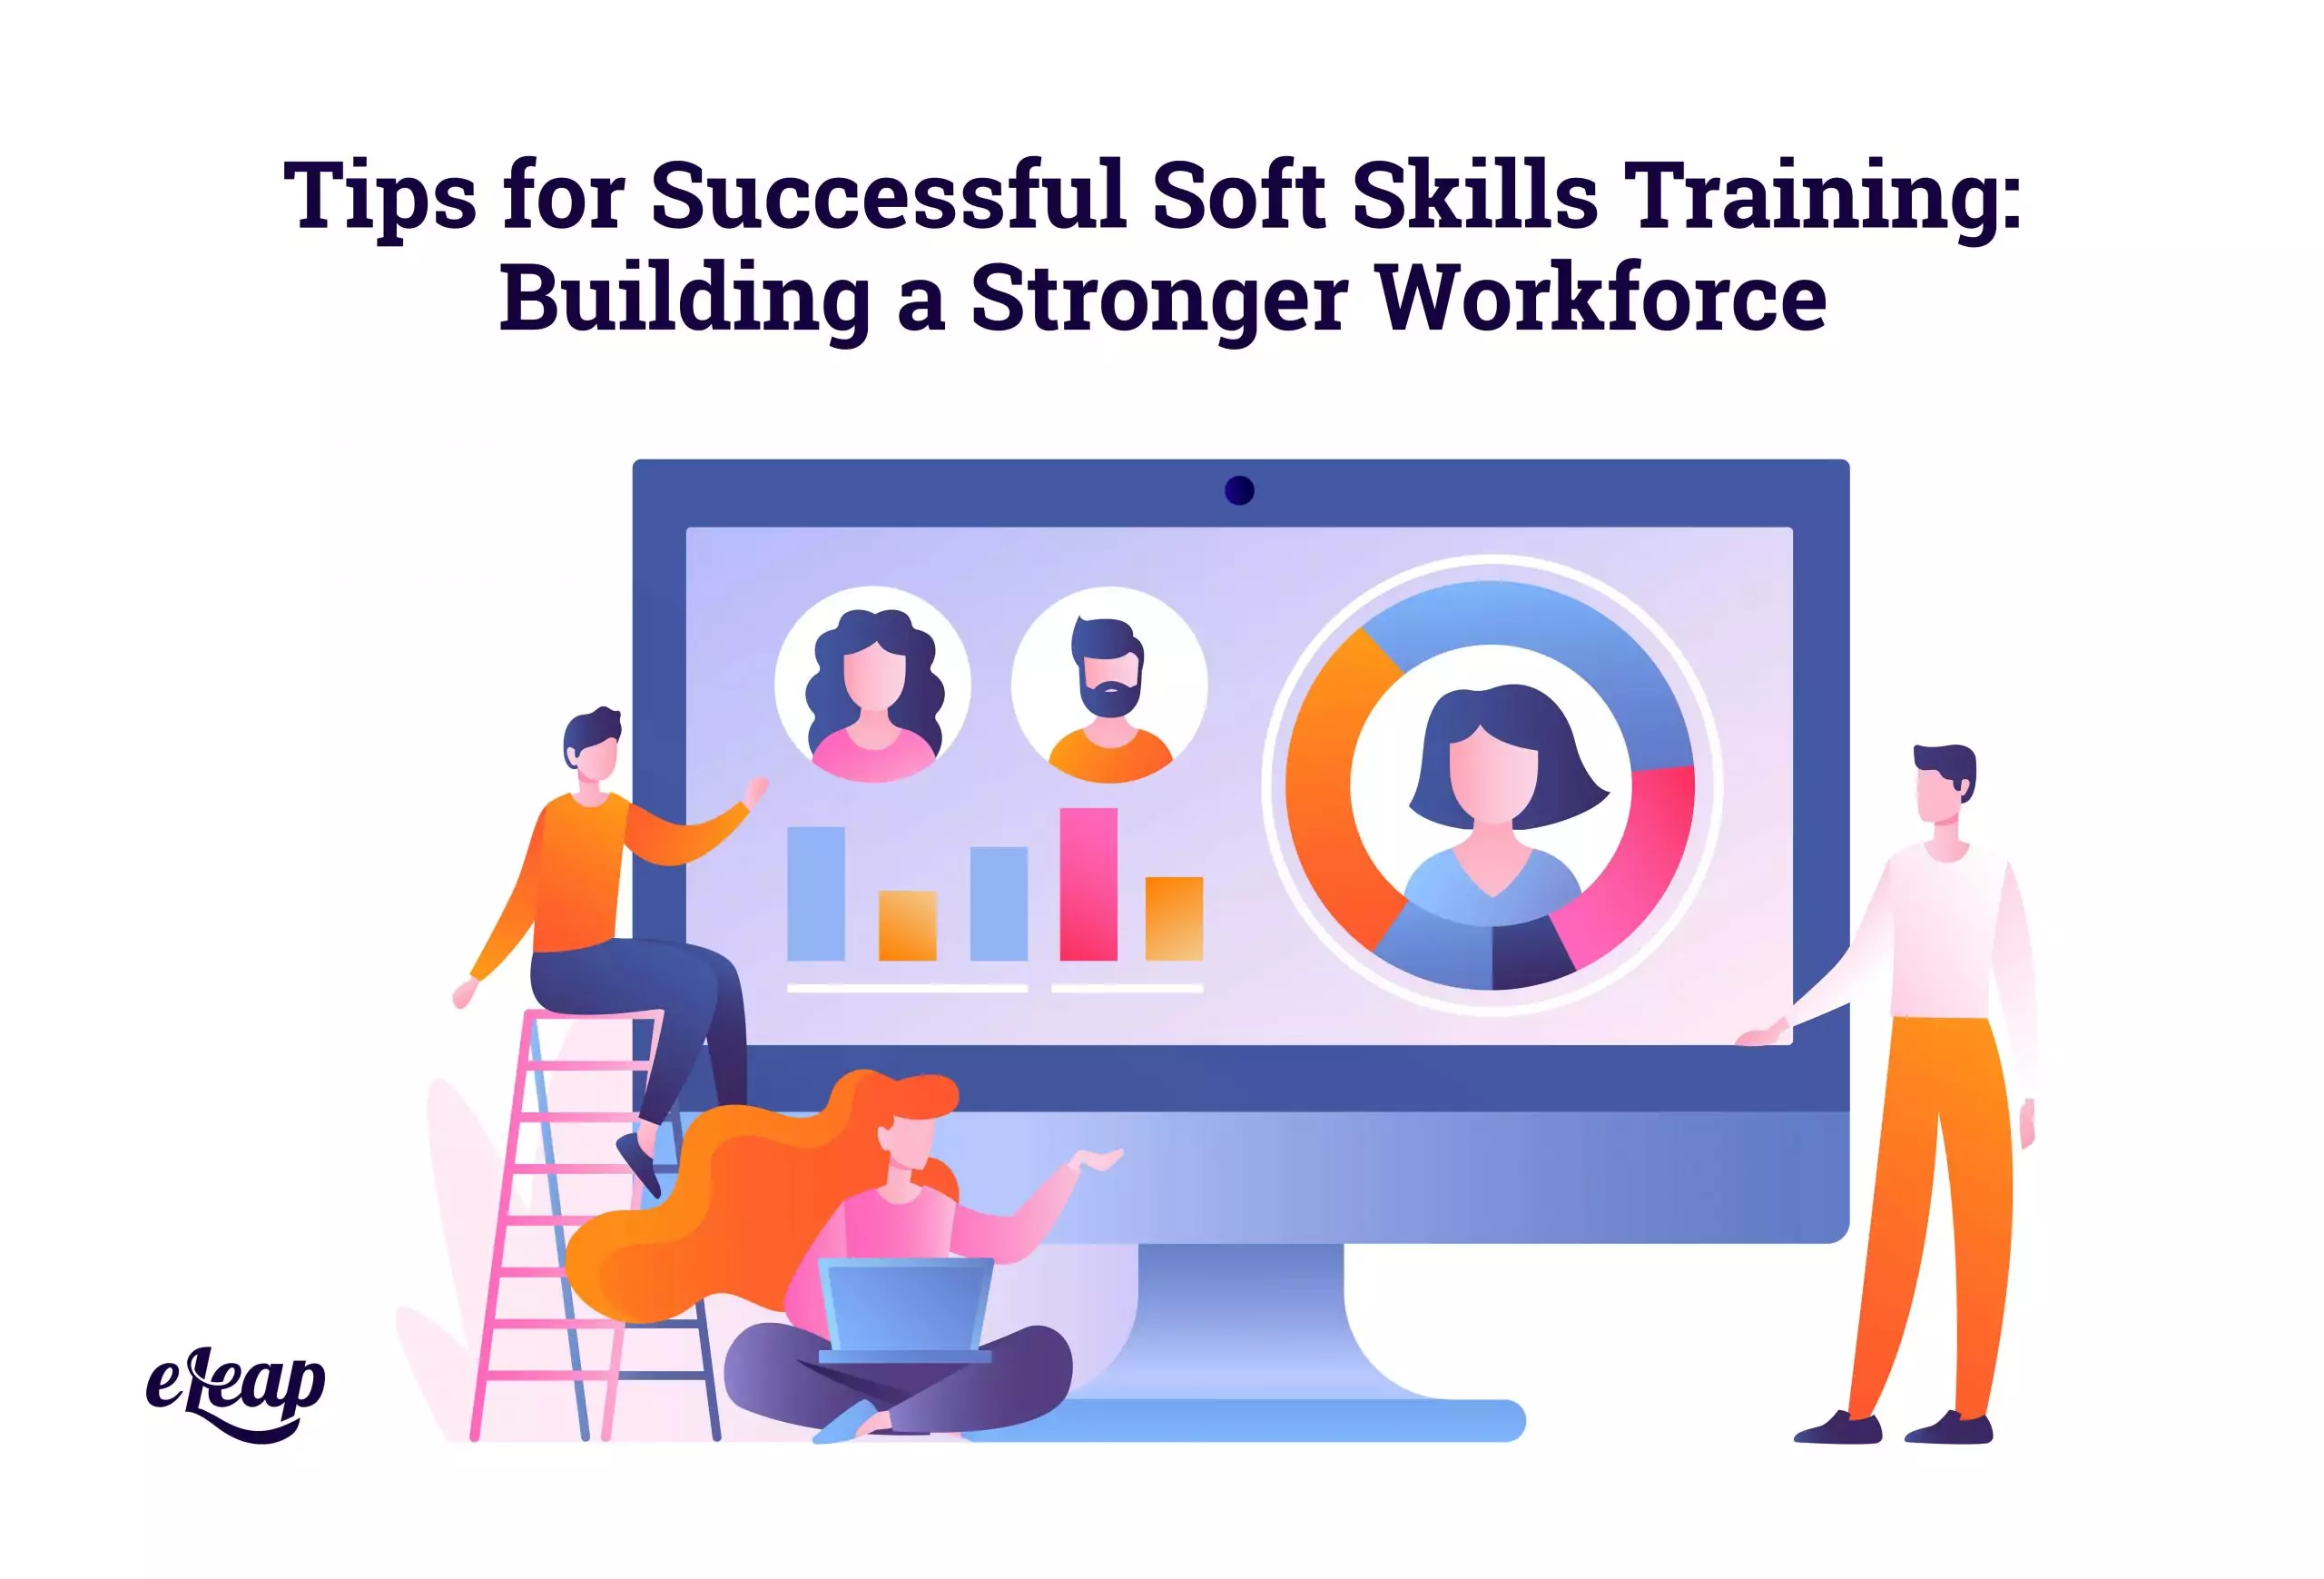 Tips for Successful Soft Skills Training: Building a Stronger Workforce